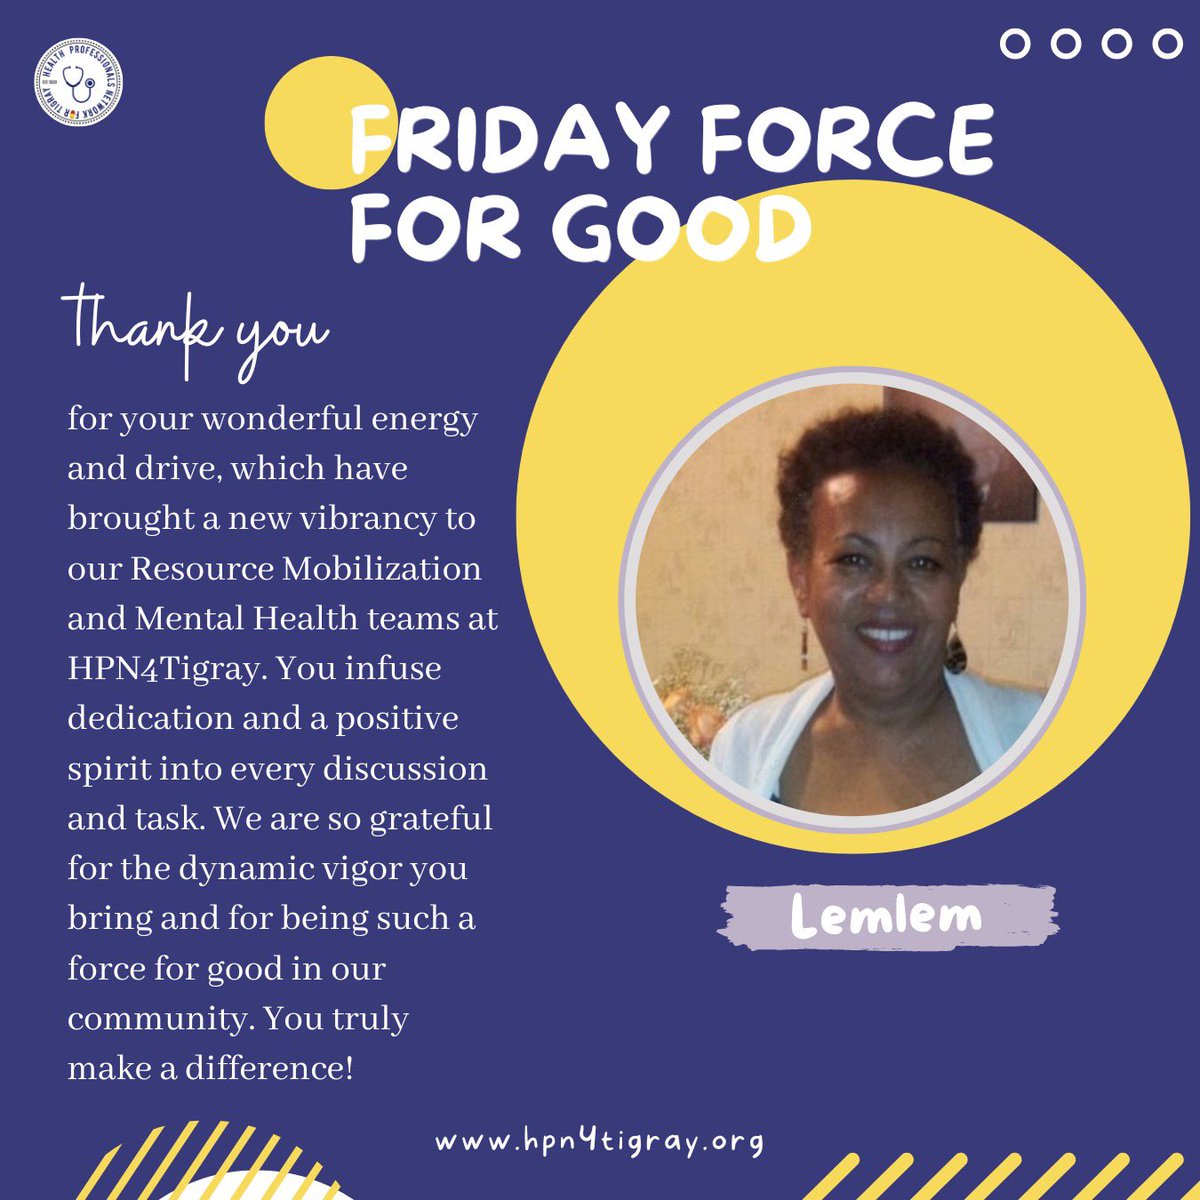 🌟 Today, we celebrate Lemlem as our #FridayForce4Good at #HPN4Tigray! 🎉 As a member of our Resource Mobilization as well as Mental Health teams, her dedication and uplifting spirit truly shines in everything she undertakes. Thank you, Lemlem haftena, for your positive impact!🙏🏾